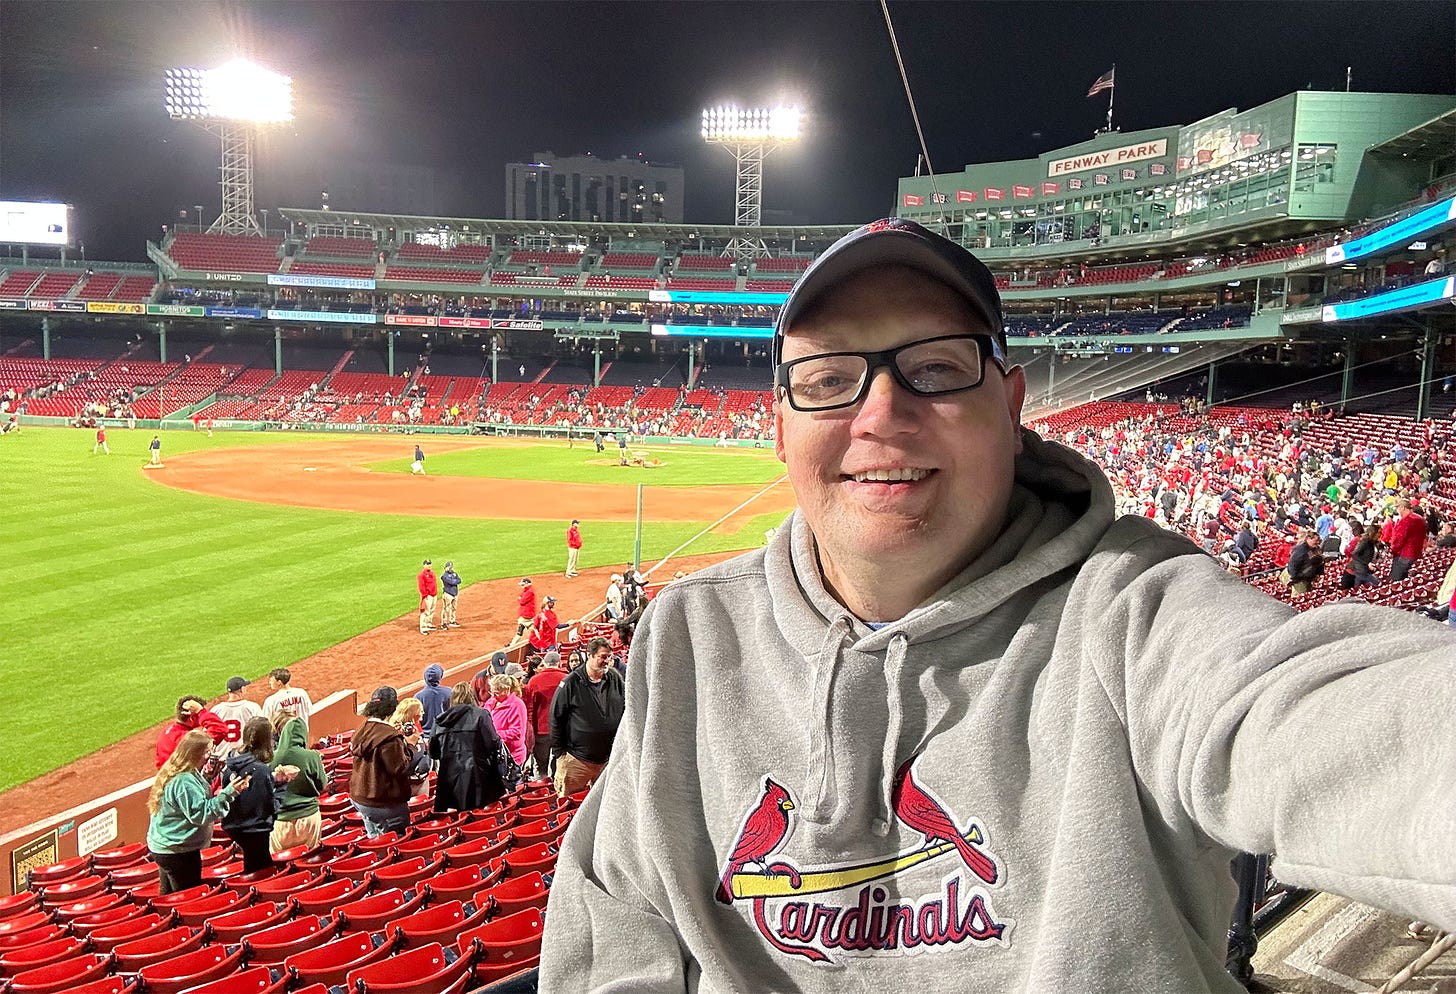 Selfie of John from left field grand stands at Fenway Park.